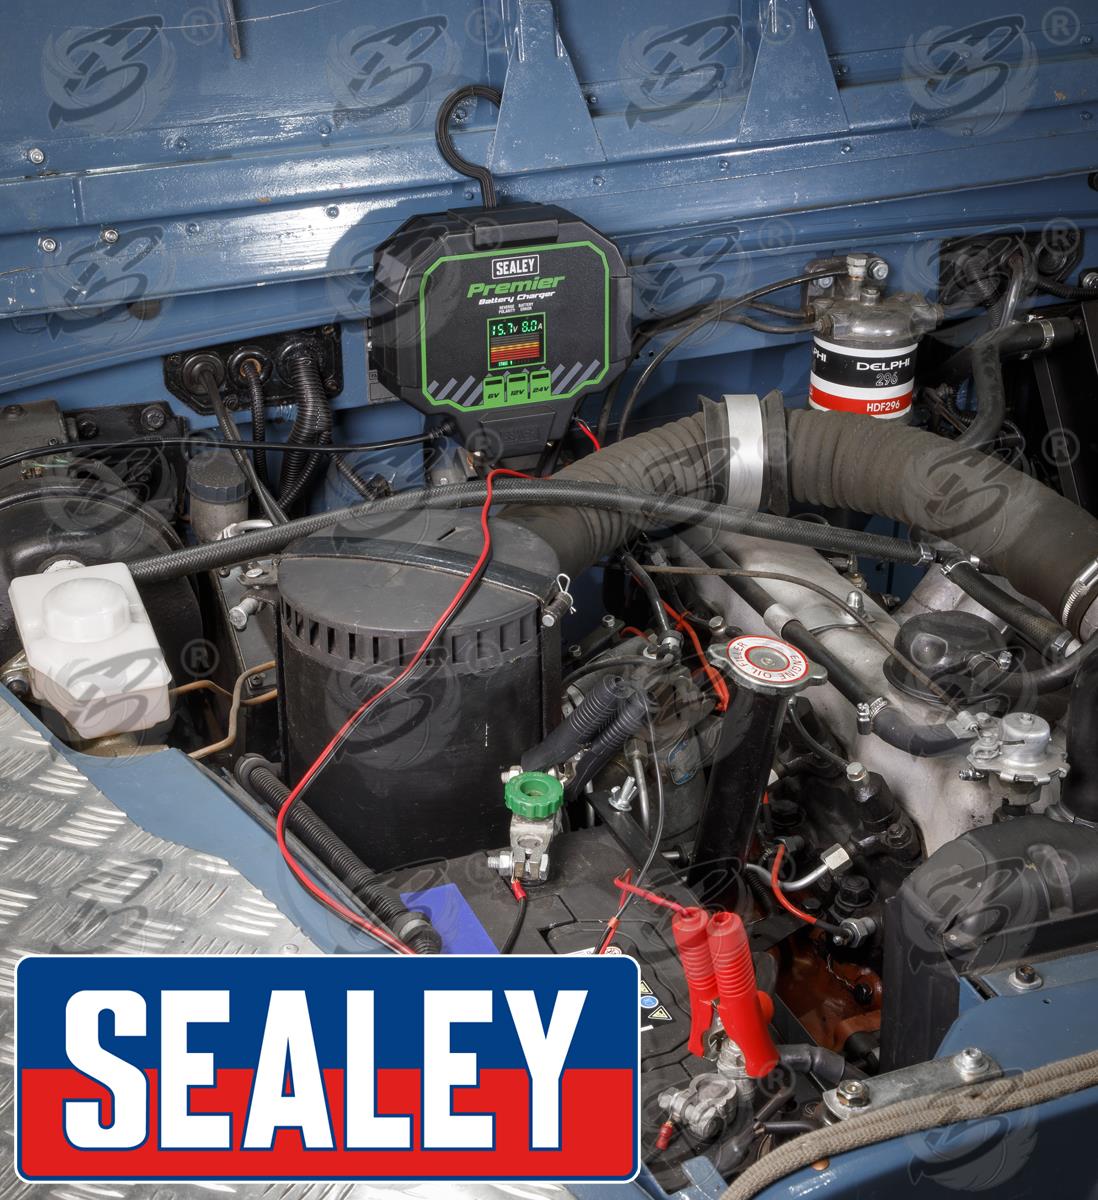 SEALEY 12A FULLY AUTOMATED BATTERY CHARGER